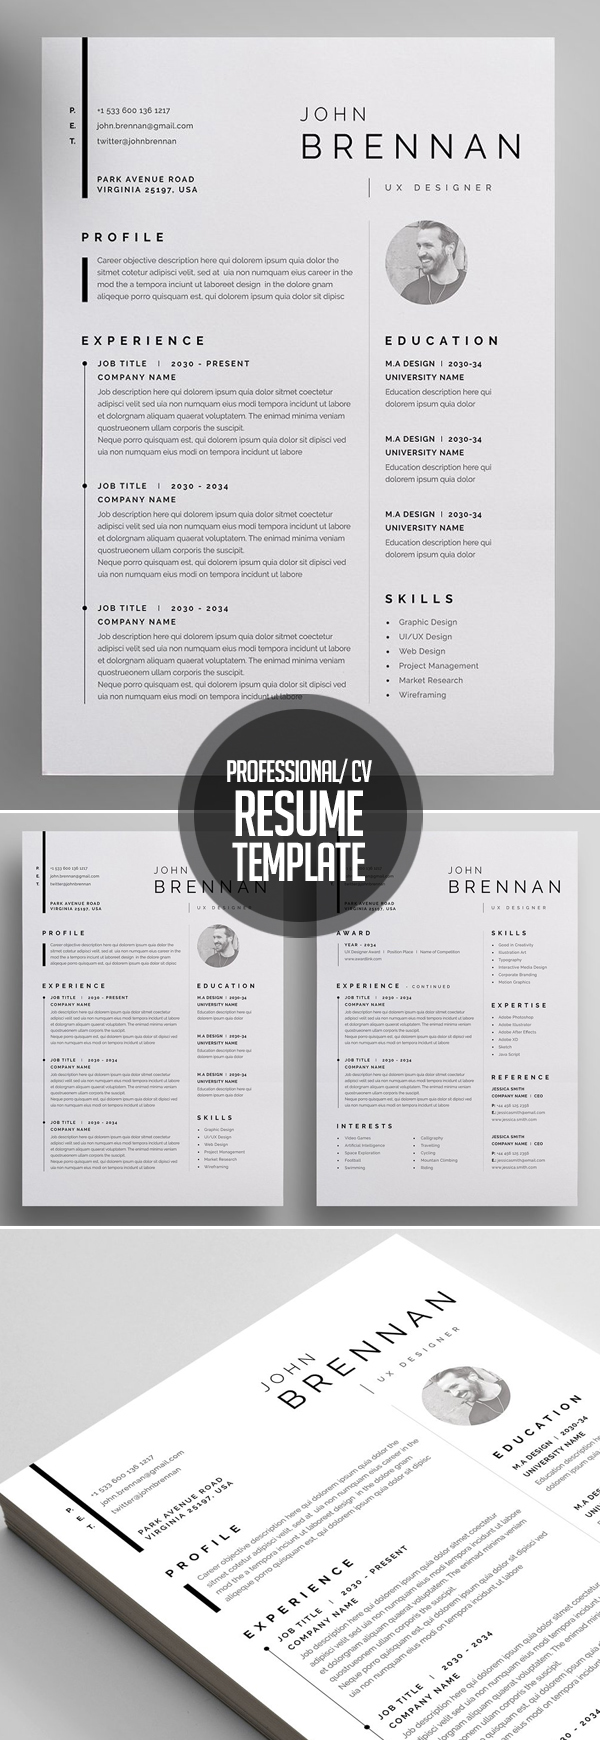 Clean, Professional Resume and Letterhead Template